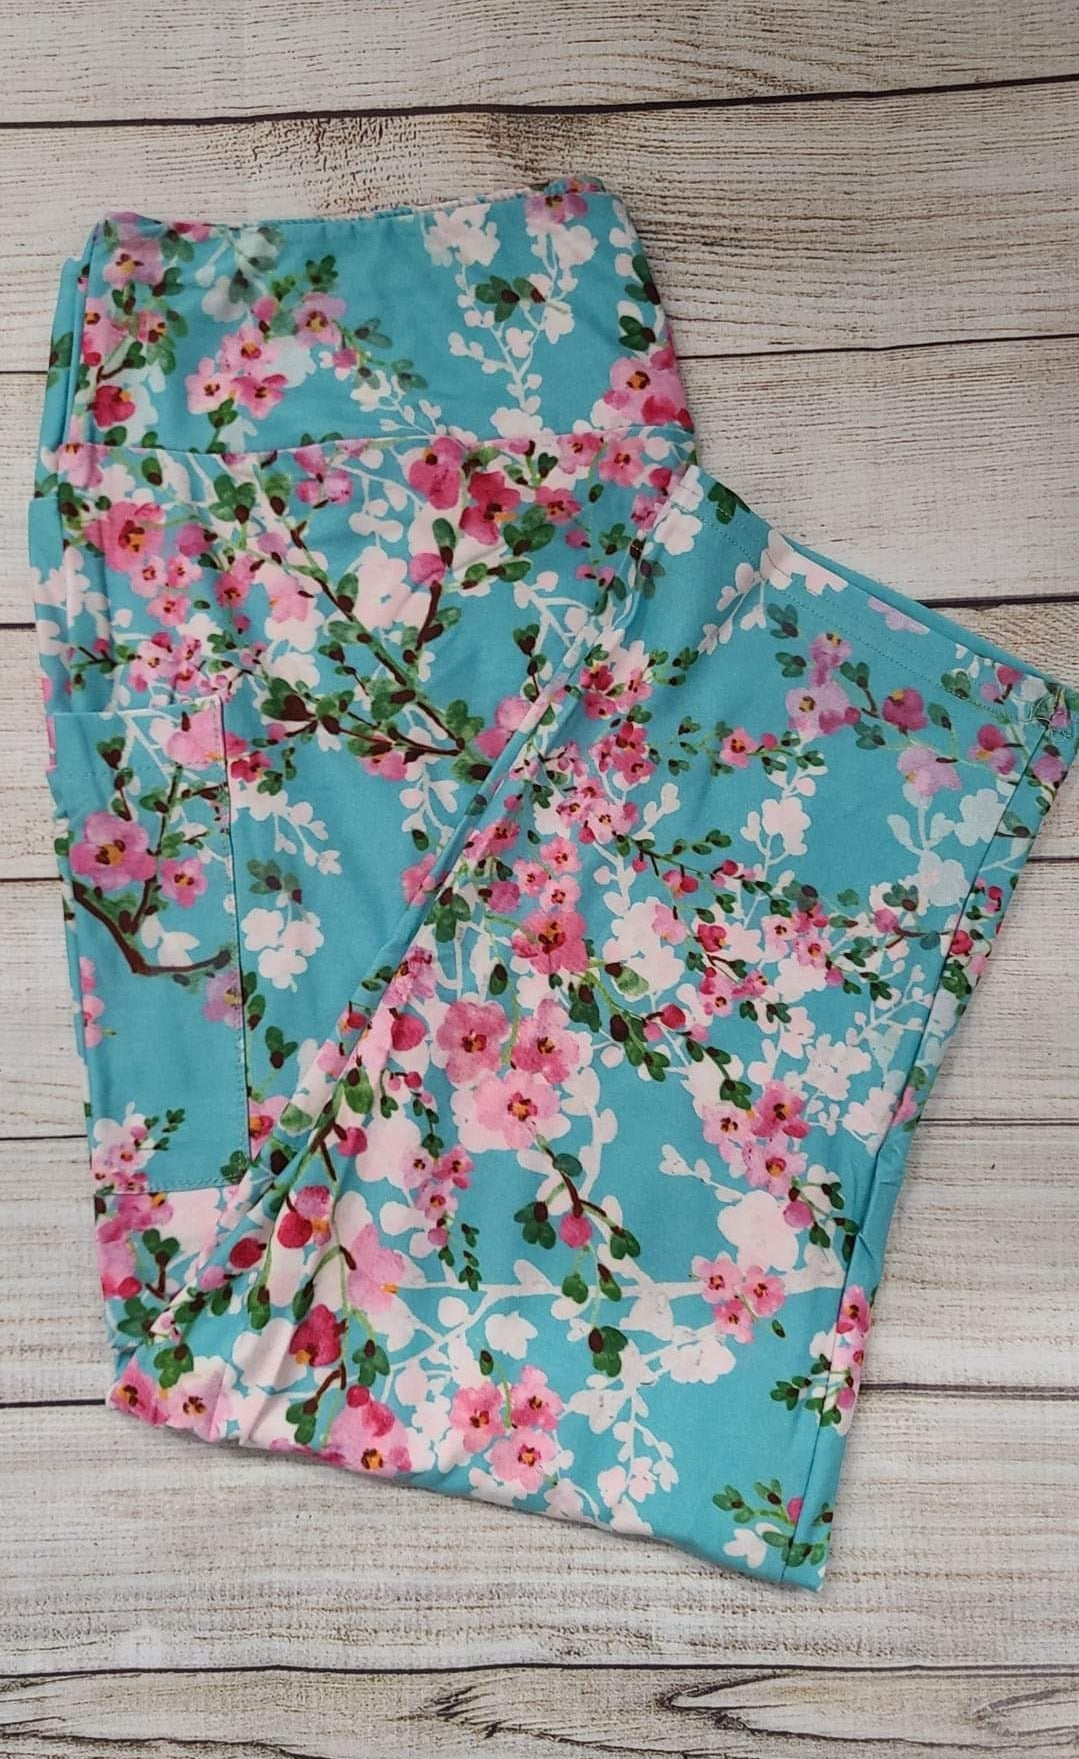 Victorian Floral leggings and capris with pockets